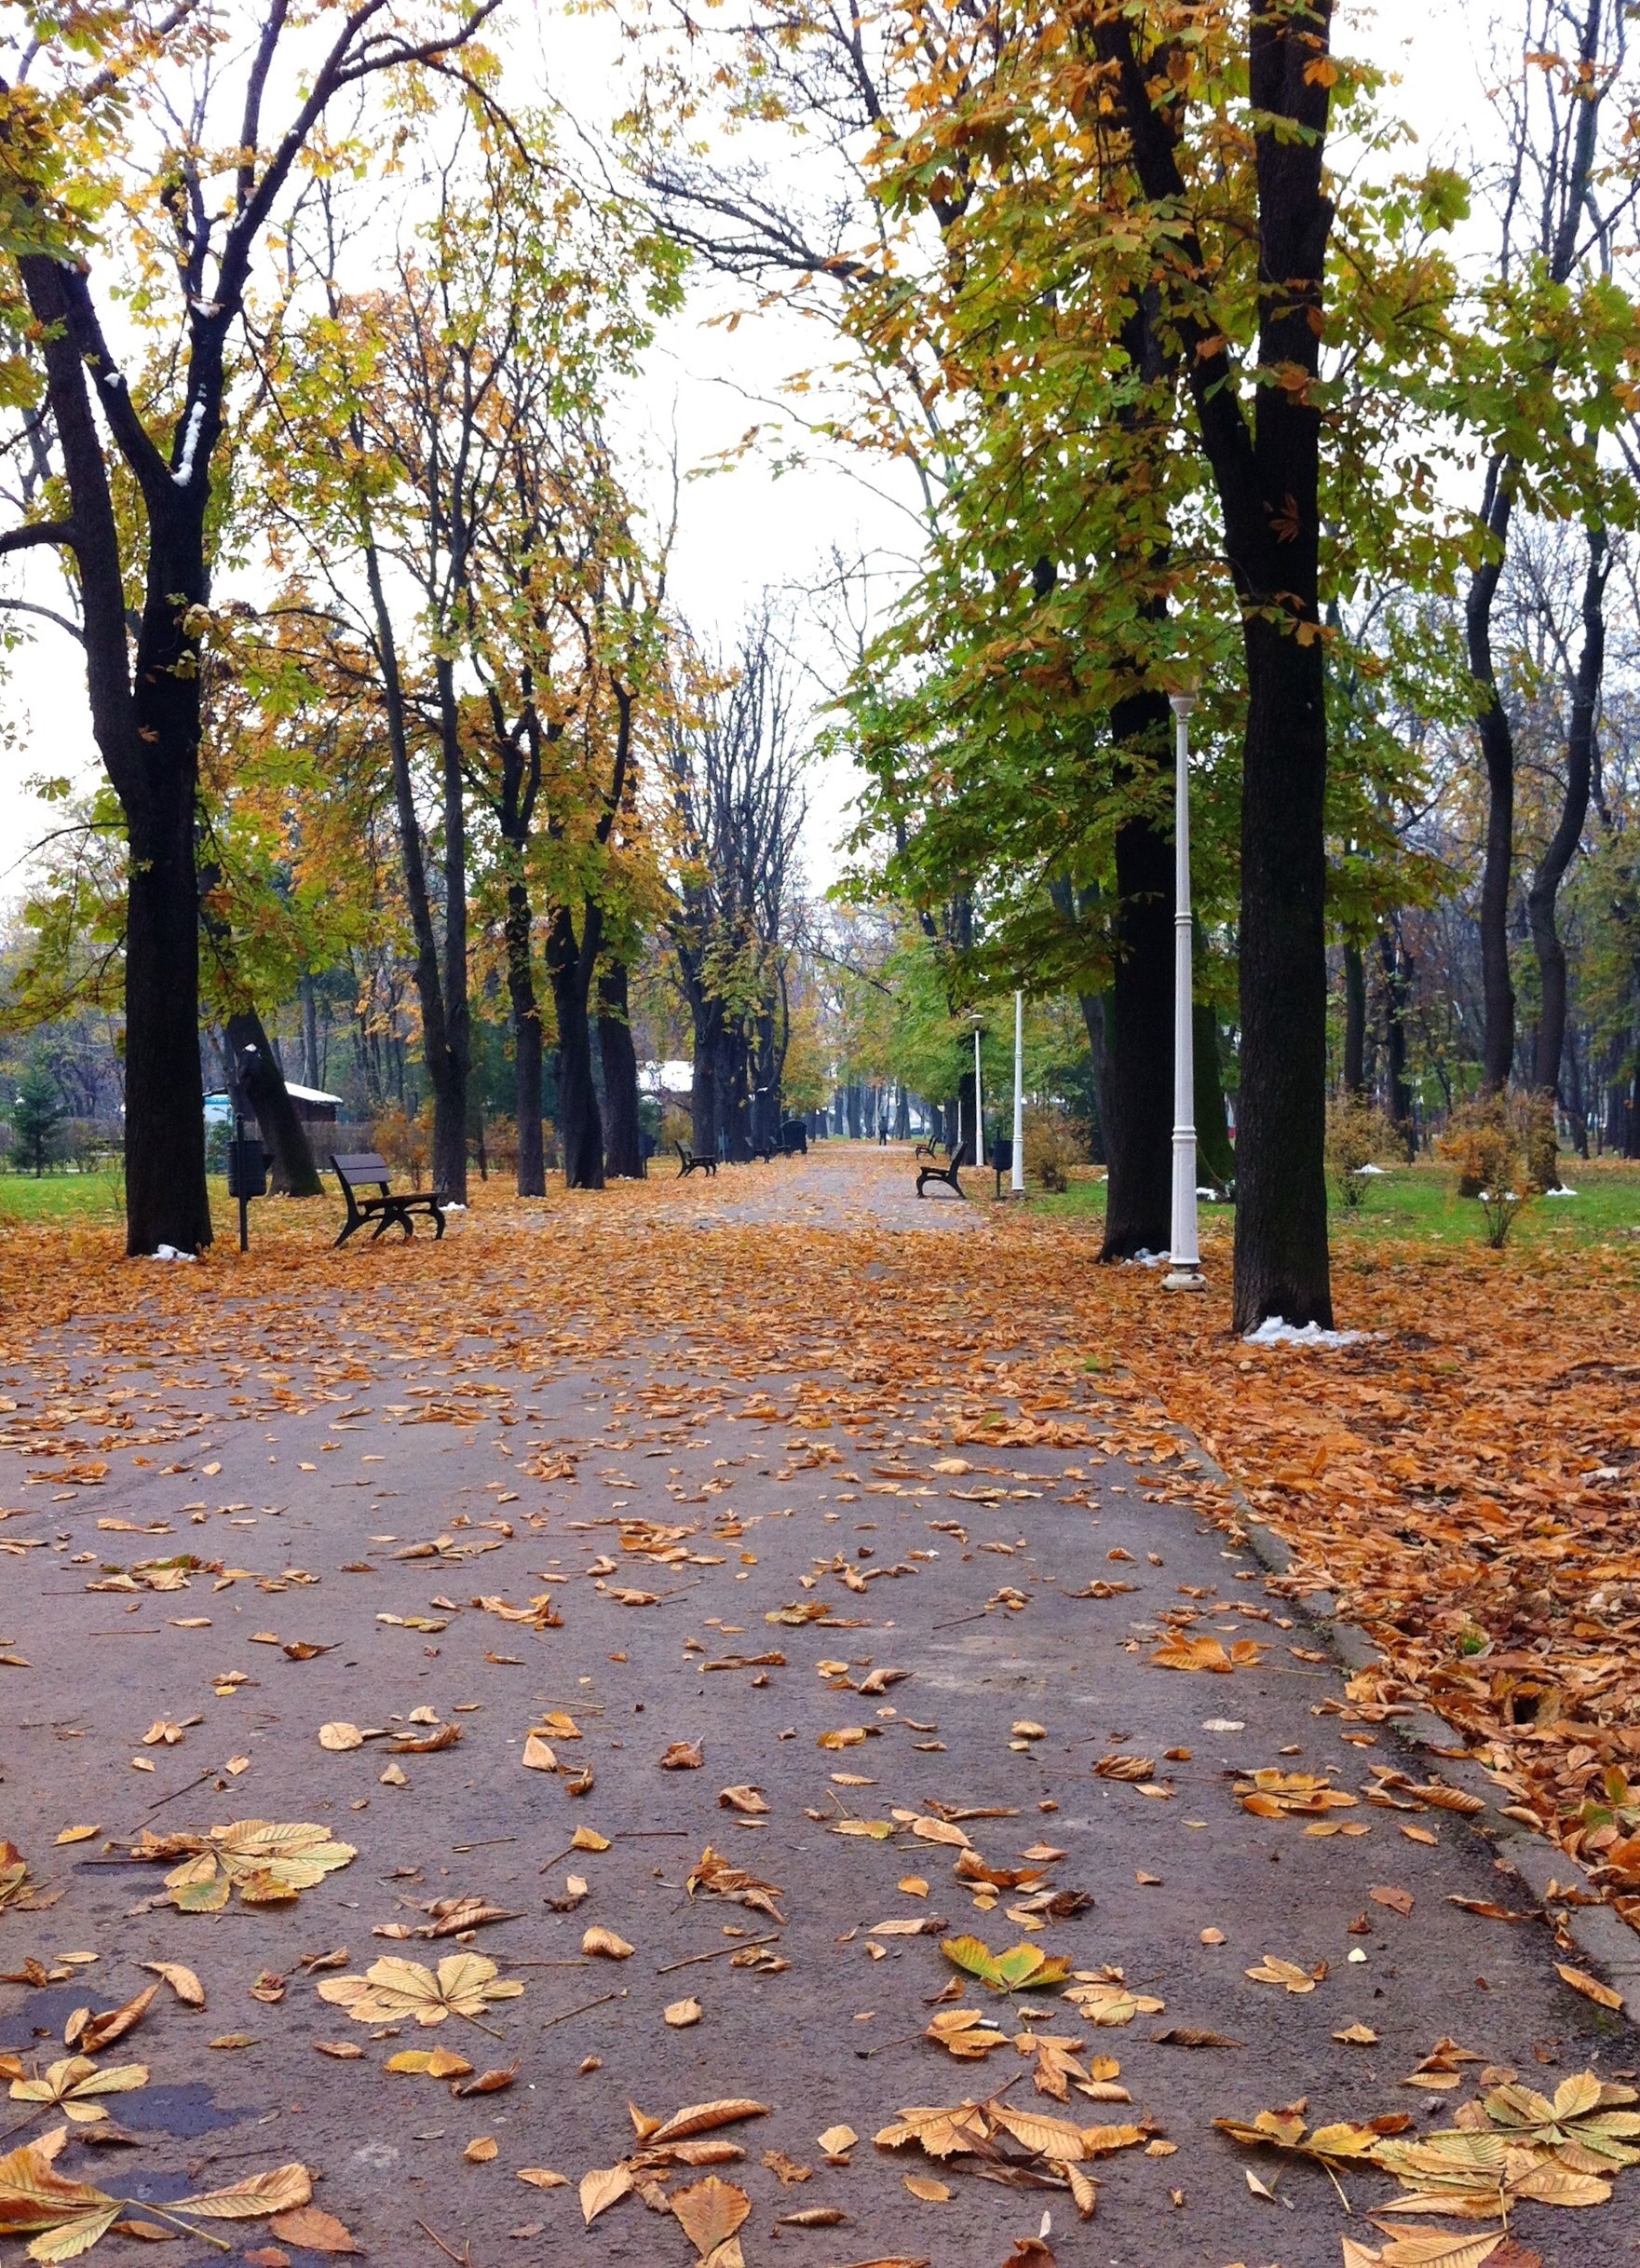 Discovering hidden alleys in a park lost among the fallen autumn leaves.. One of Bucharest's simplest pleasures